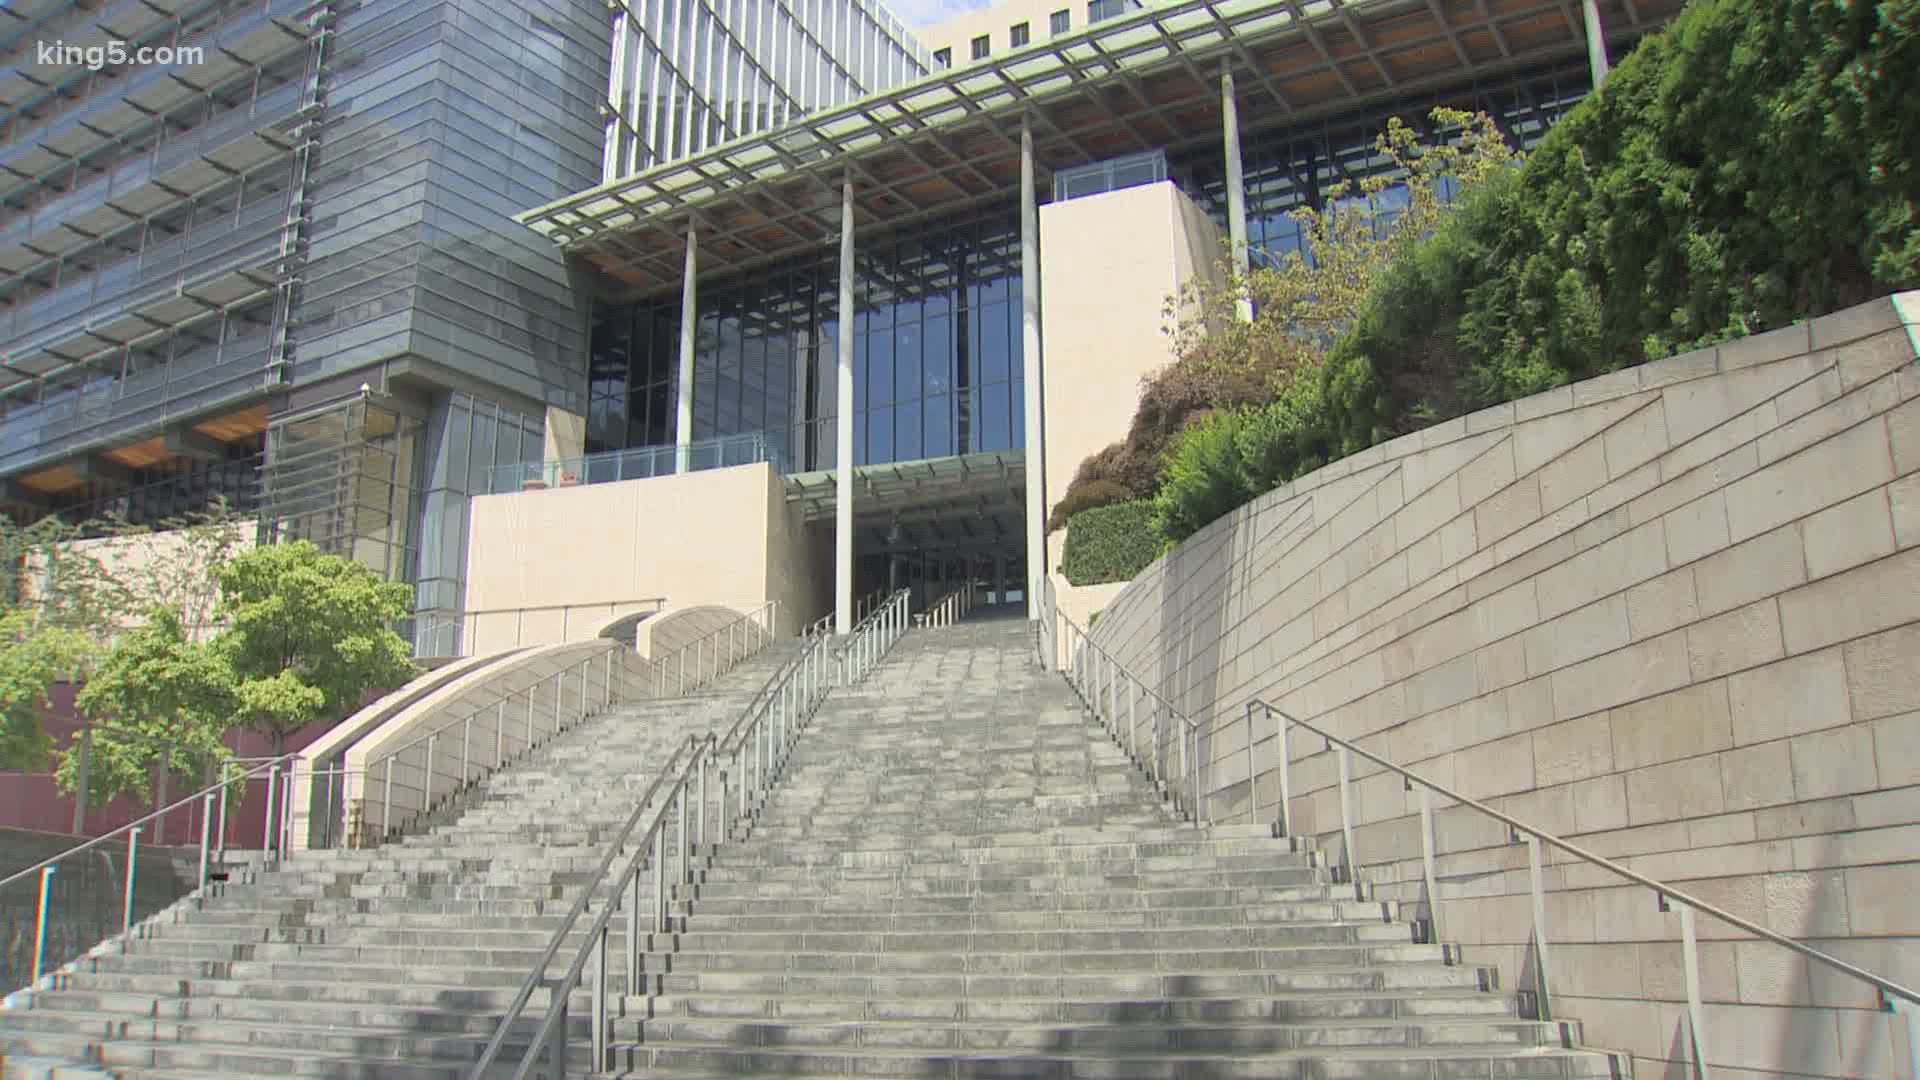 The Seattle City Council approved $57 million from city reserves. They originally wanted $86 million, which Mayor Durkan vetoed and the council later overruled.